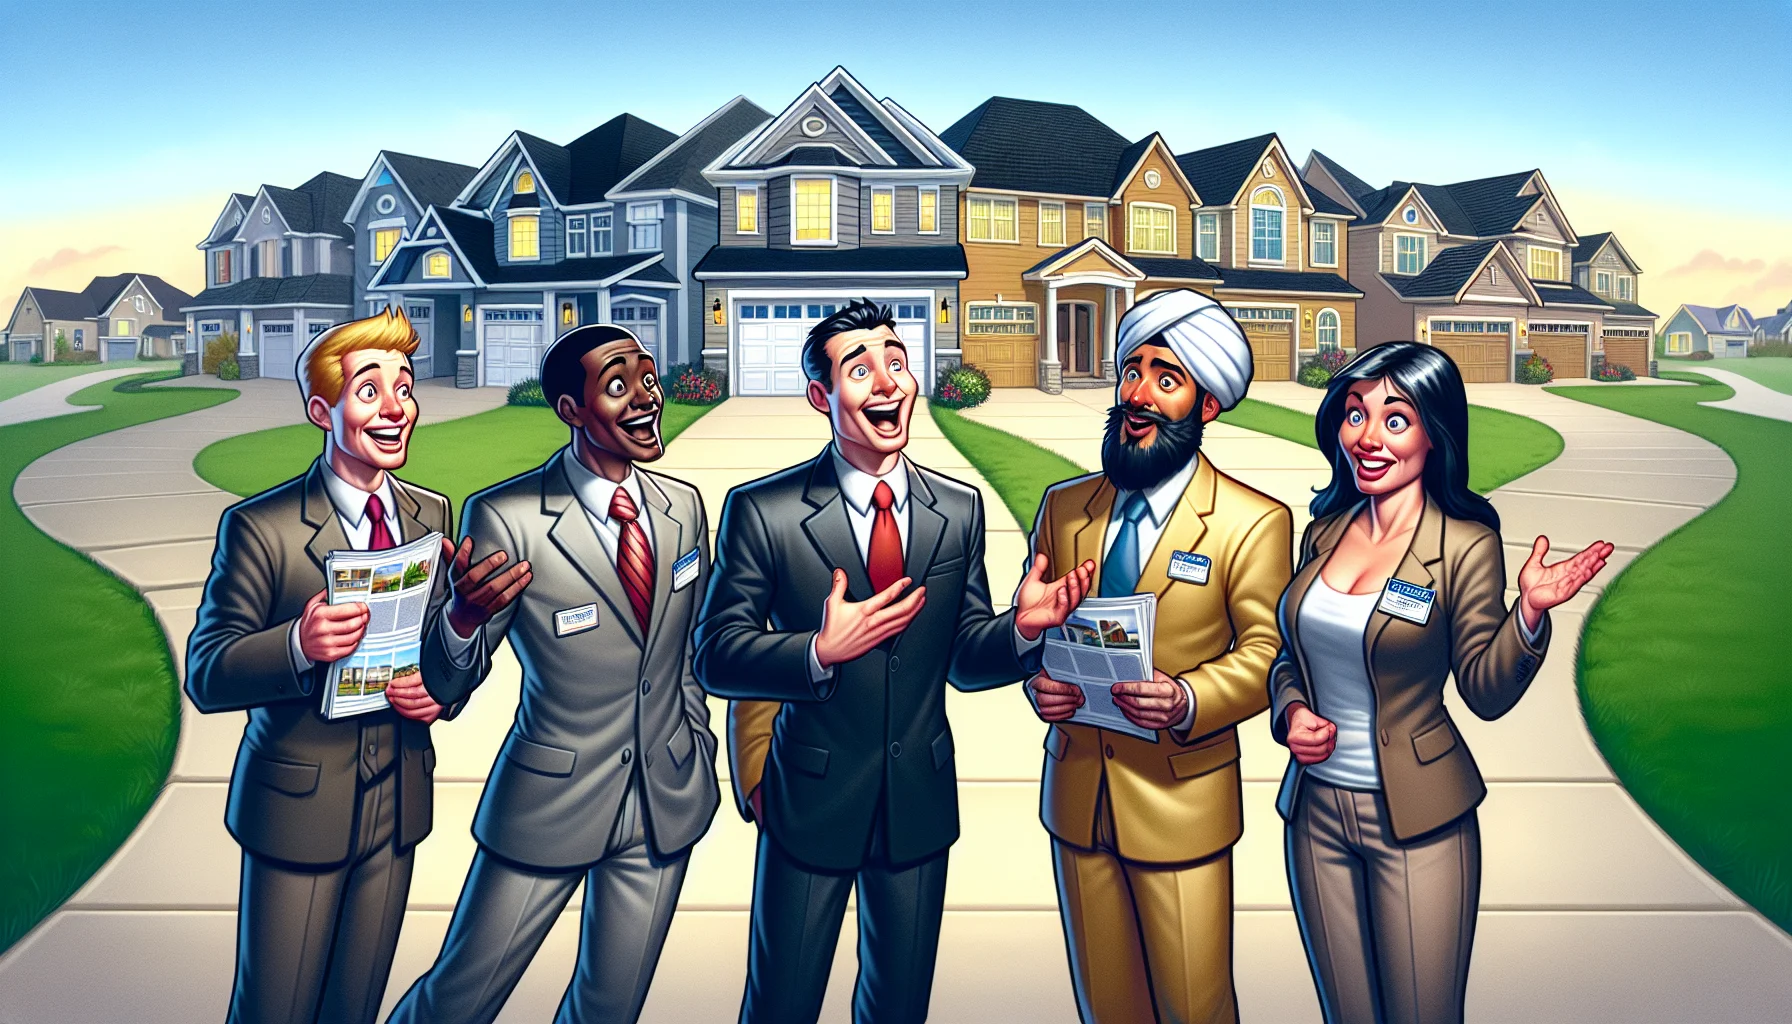 Illustrate a humorous yet realistic scene showcasing a group of five realtors, each with different descents - Black, Caucasian, Hispanic, Middle-Eastern, and South Asian respectively. Each realtor is enthusiastically explaining the features of their represented properties. They all stand in front of an row of immaculate, luxurious homes, the kind often found in perfect real estate scenarios. The sky is crisp blue and the atmosphere is filled with excitement. An animated couple - a Caucasian man and a South Asian woman - looks on with wide-eyed amazement at the properties presented to them.